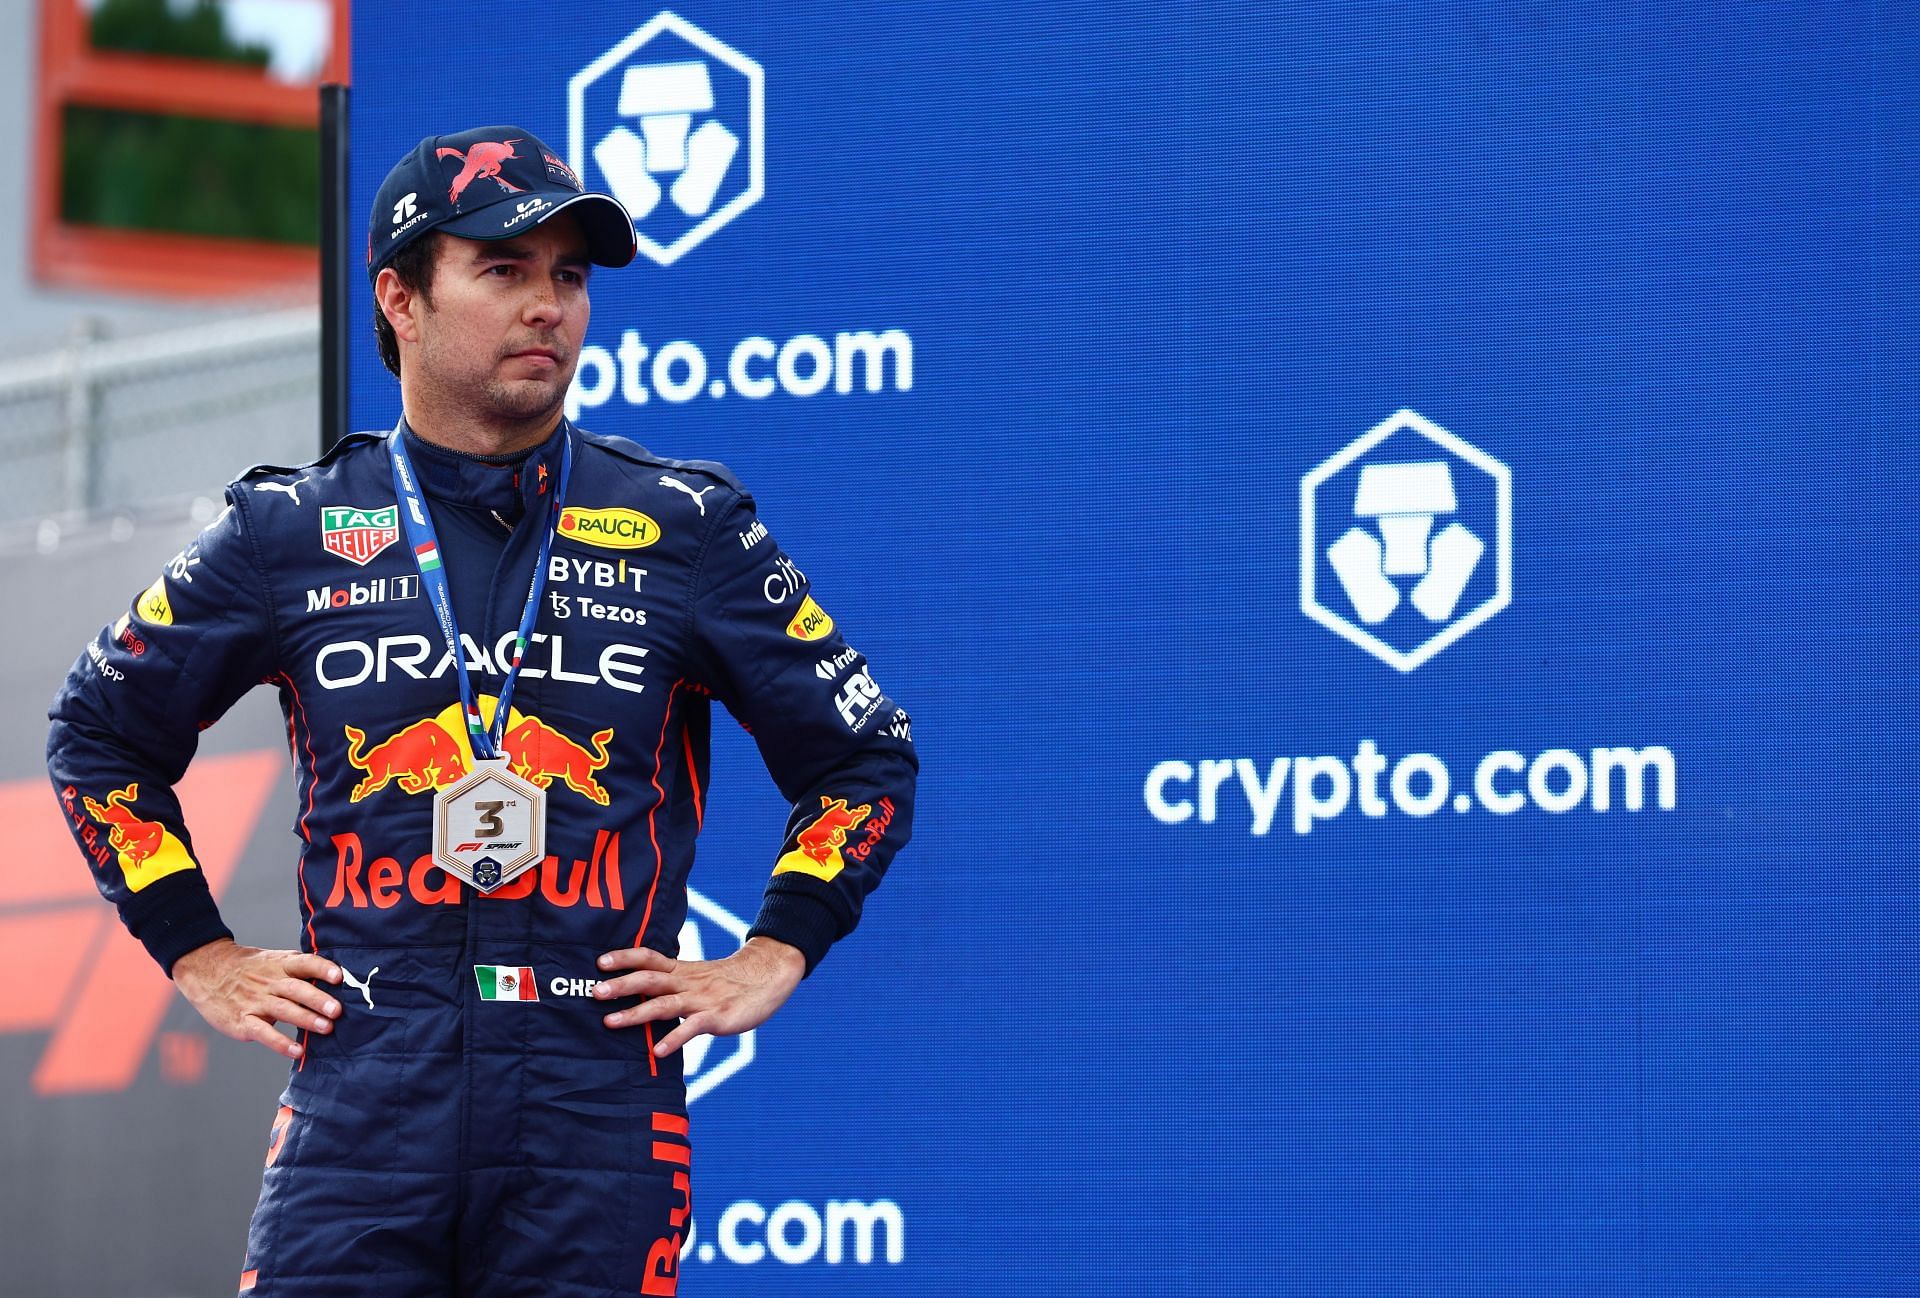 Sergio Perez on the podium after finishing third at the F1 Grand Prix of Emilia Romagna - Sprint Race